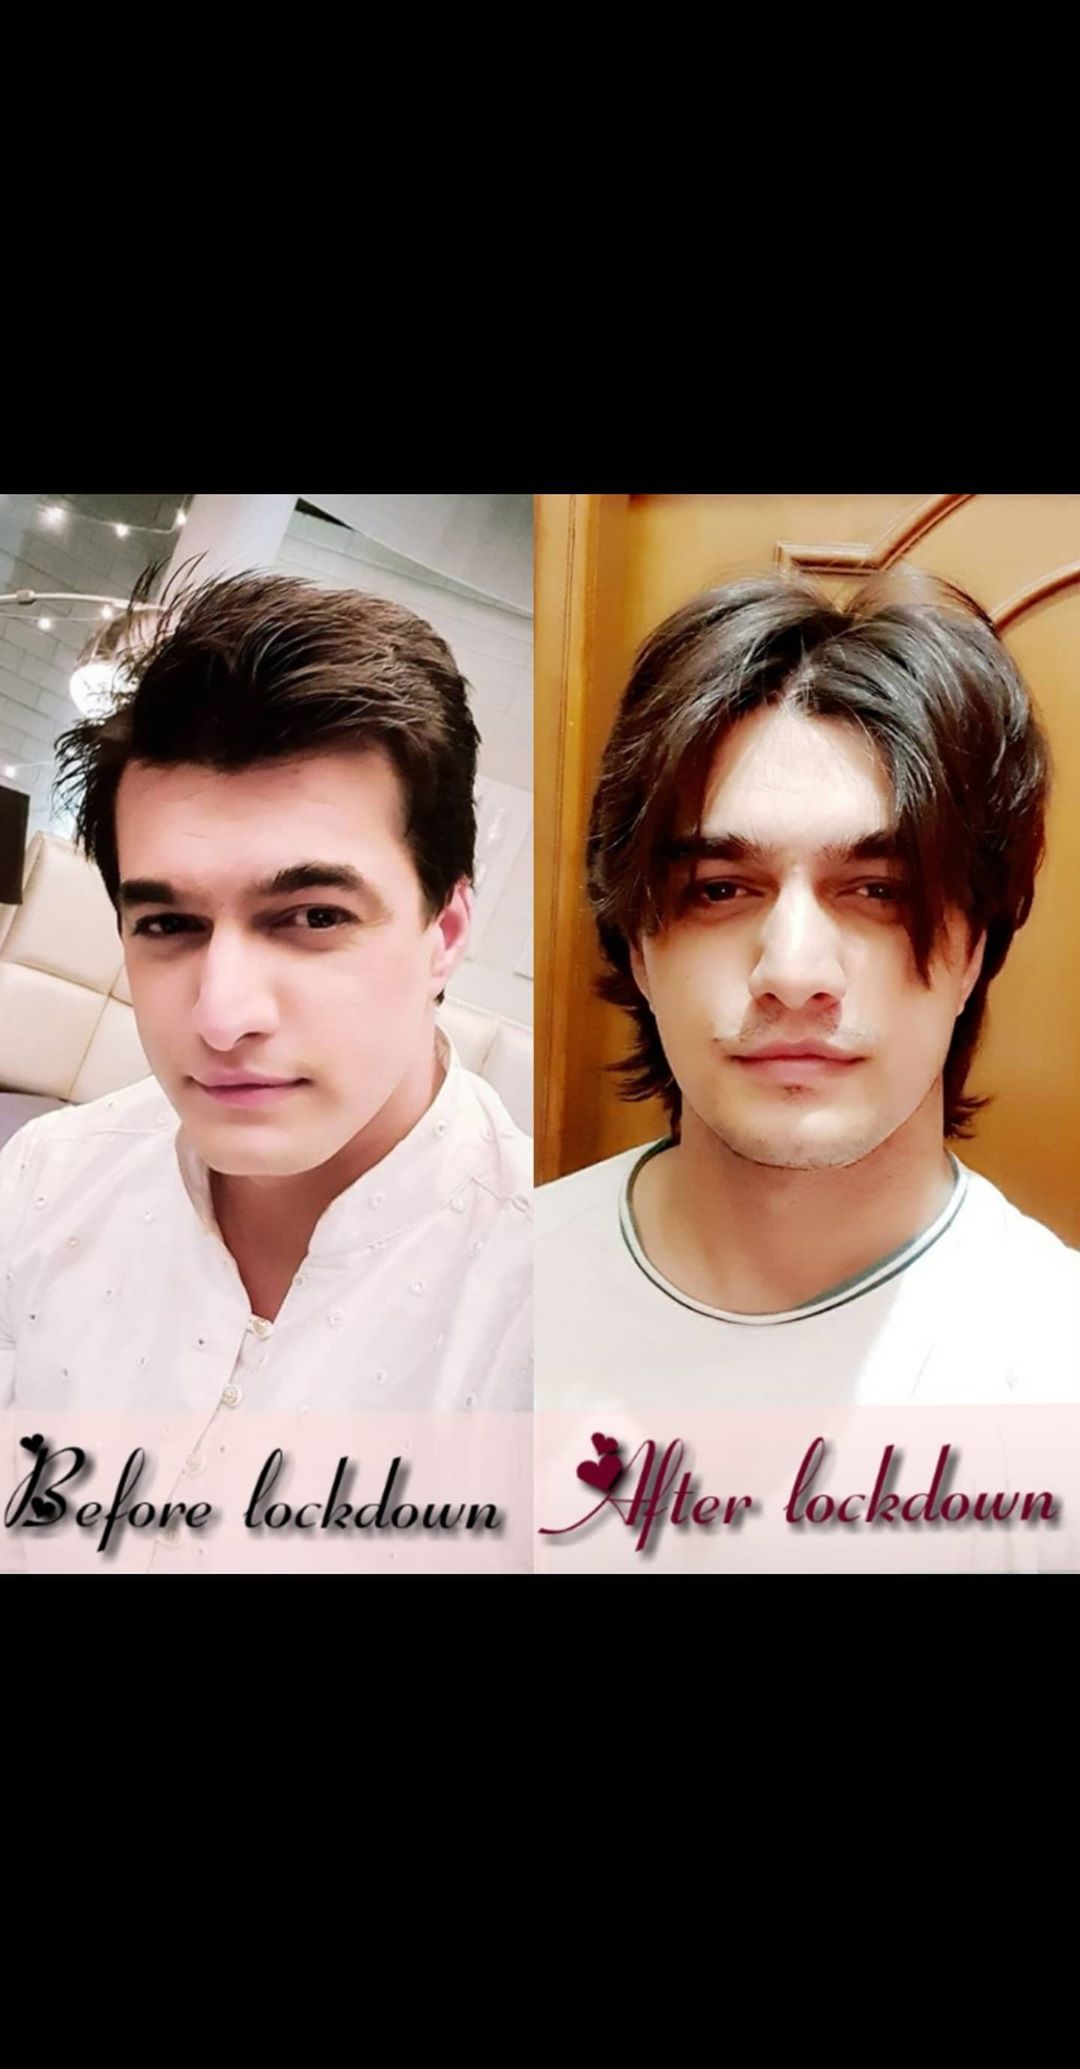 Mohsin Khan REVEALS his before and after lockdown look